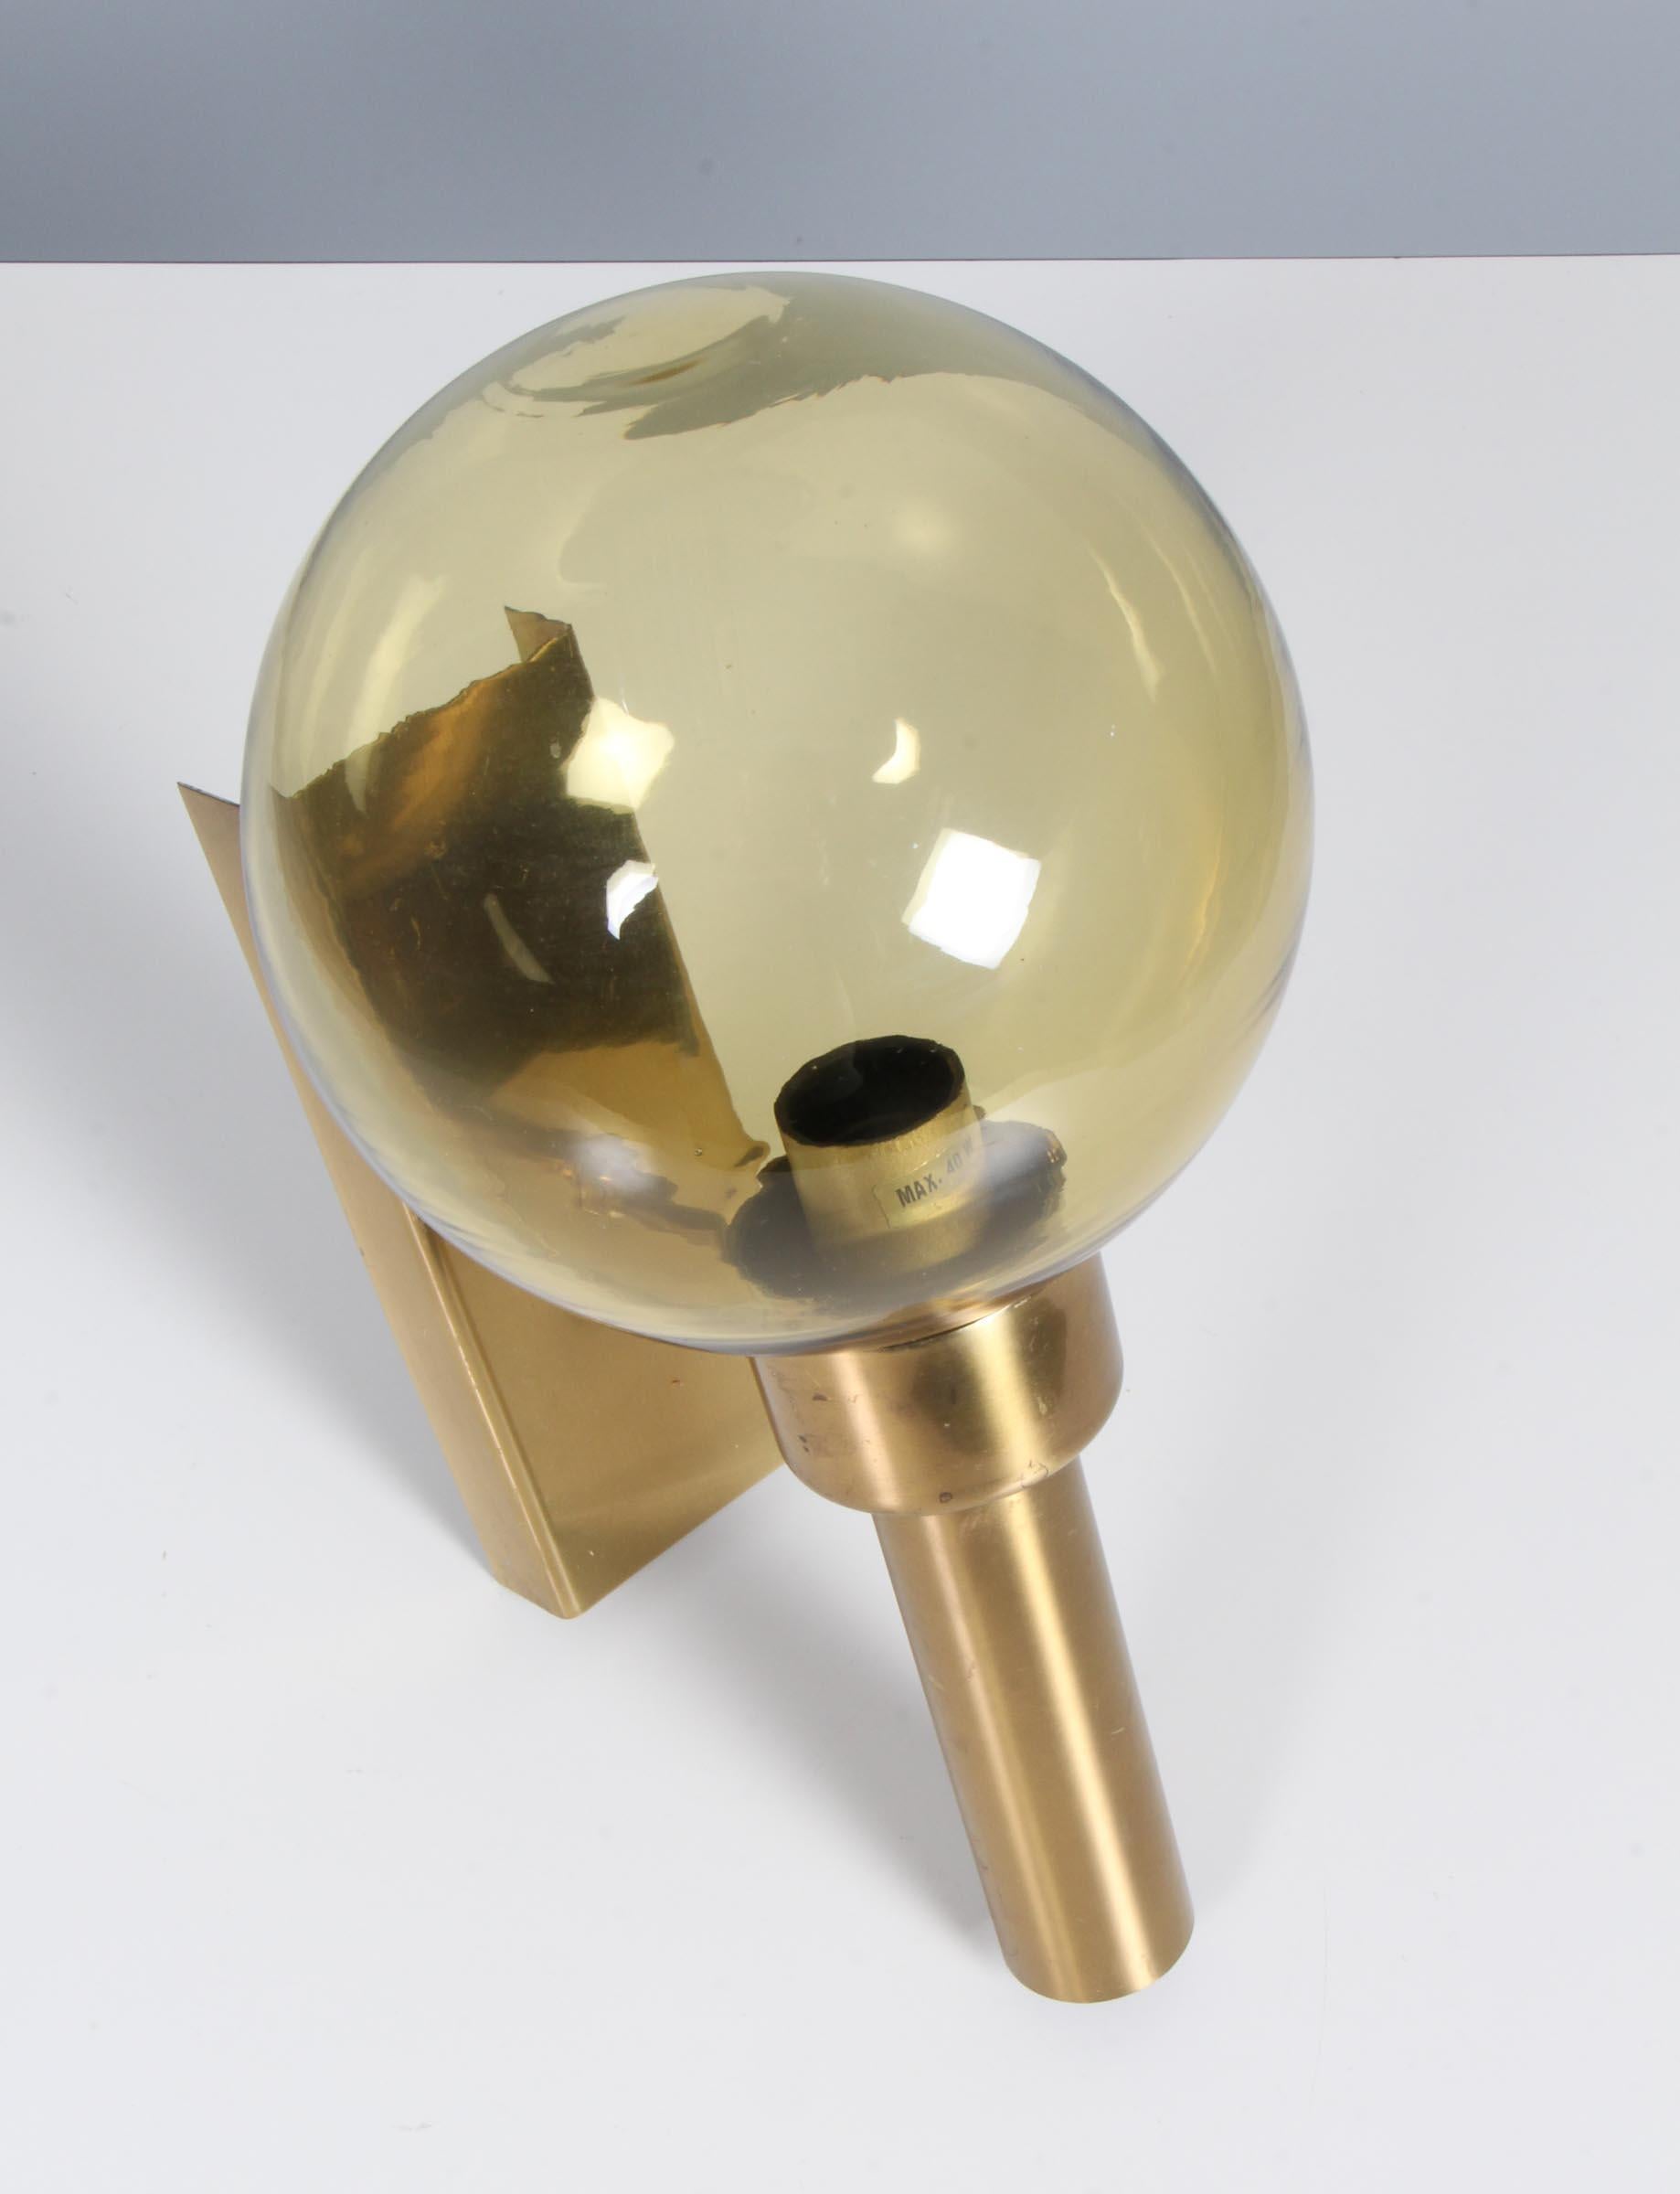 Vitrika wall lamp in glass and brass.

Made by Vitrika.